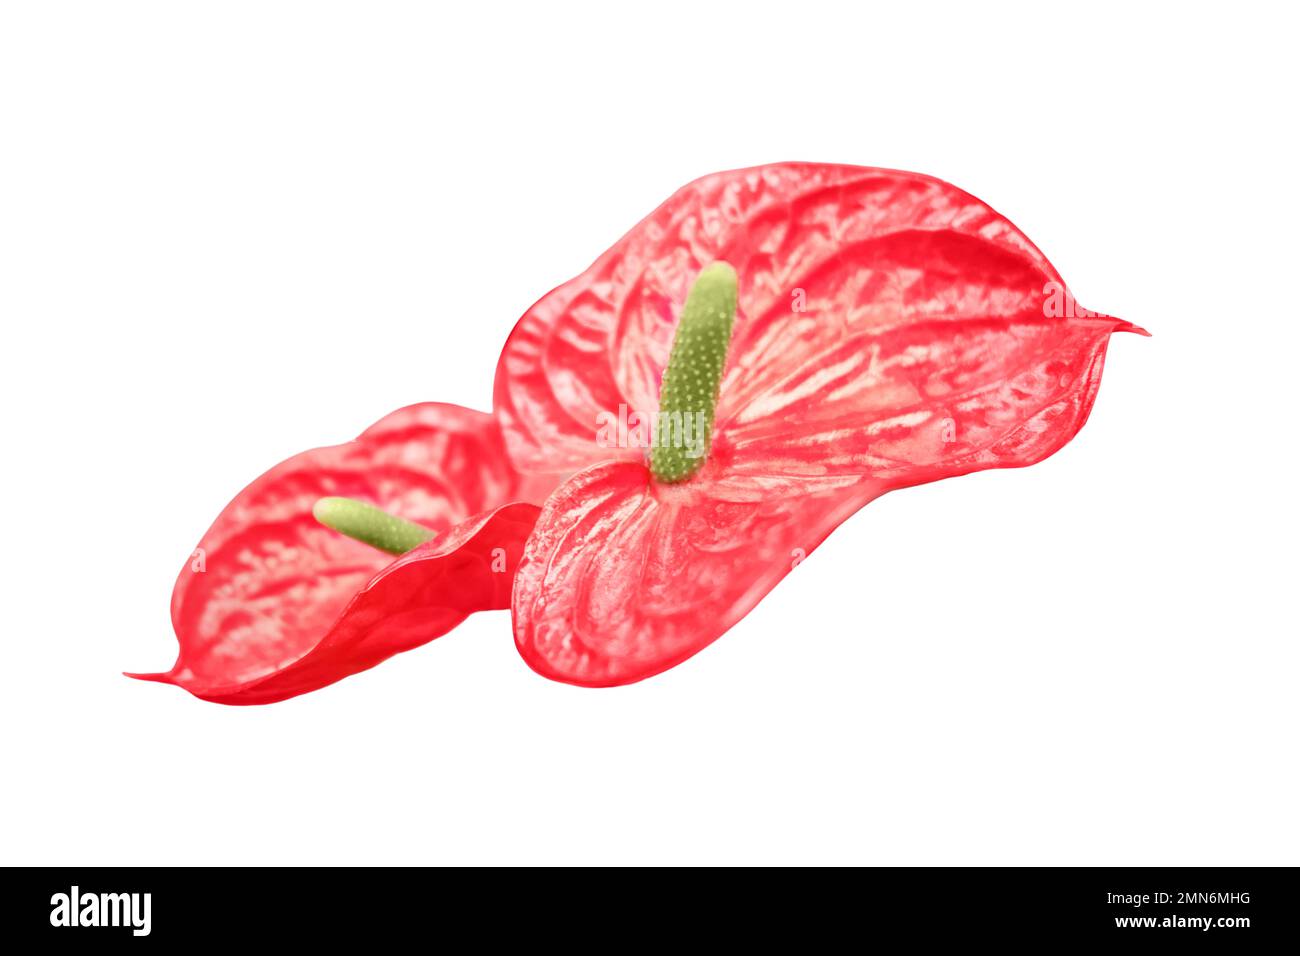 Anthurium is a genus of about 1000 species of flowering plants, the largest genus of the arum family, isolated on a white background Stock Photo